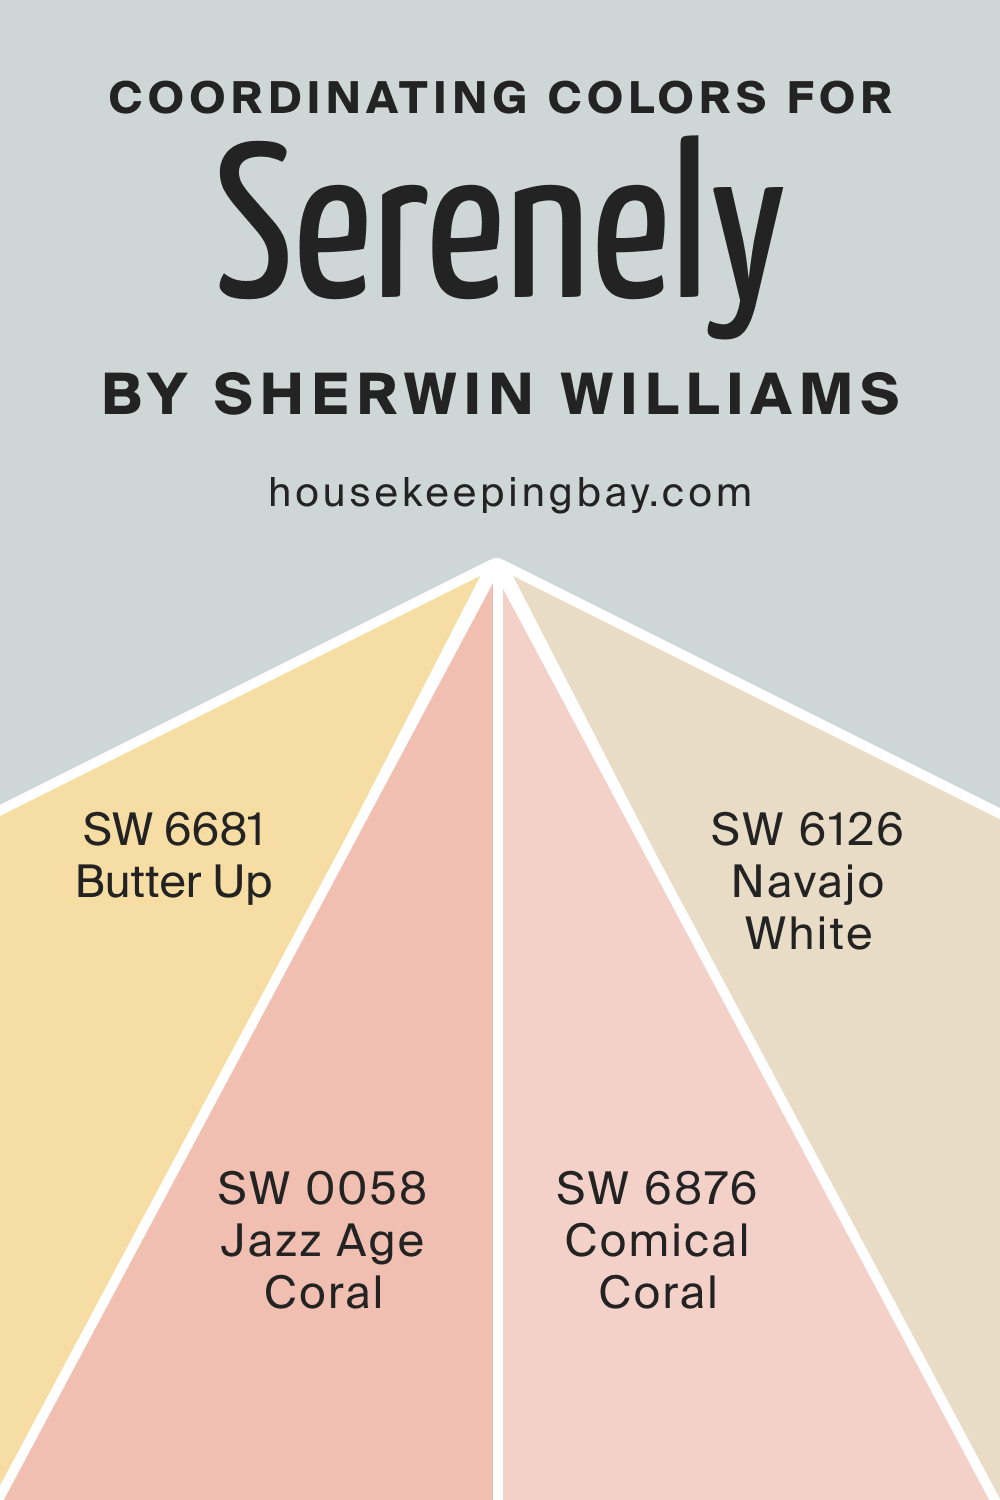 Coordinating Colors for SW 9632 Serenely by Sherwin Williams